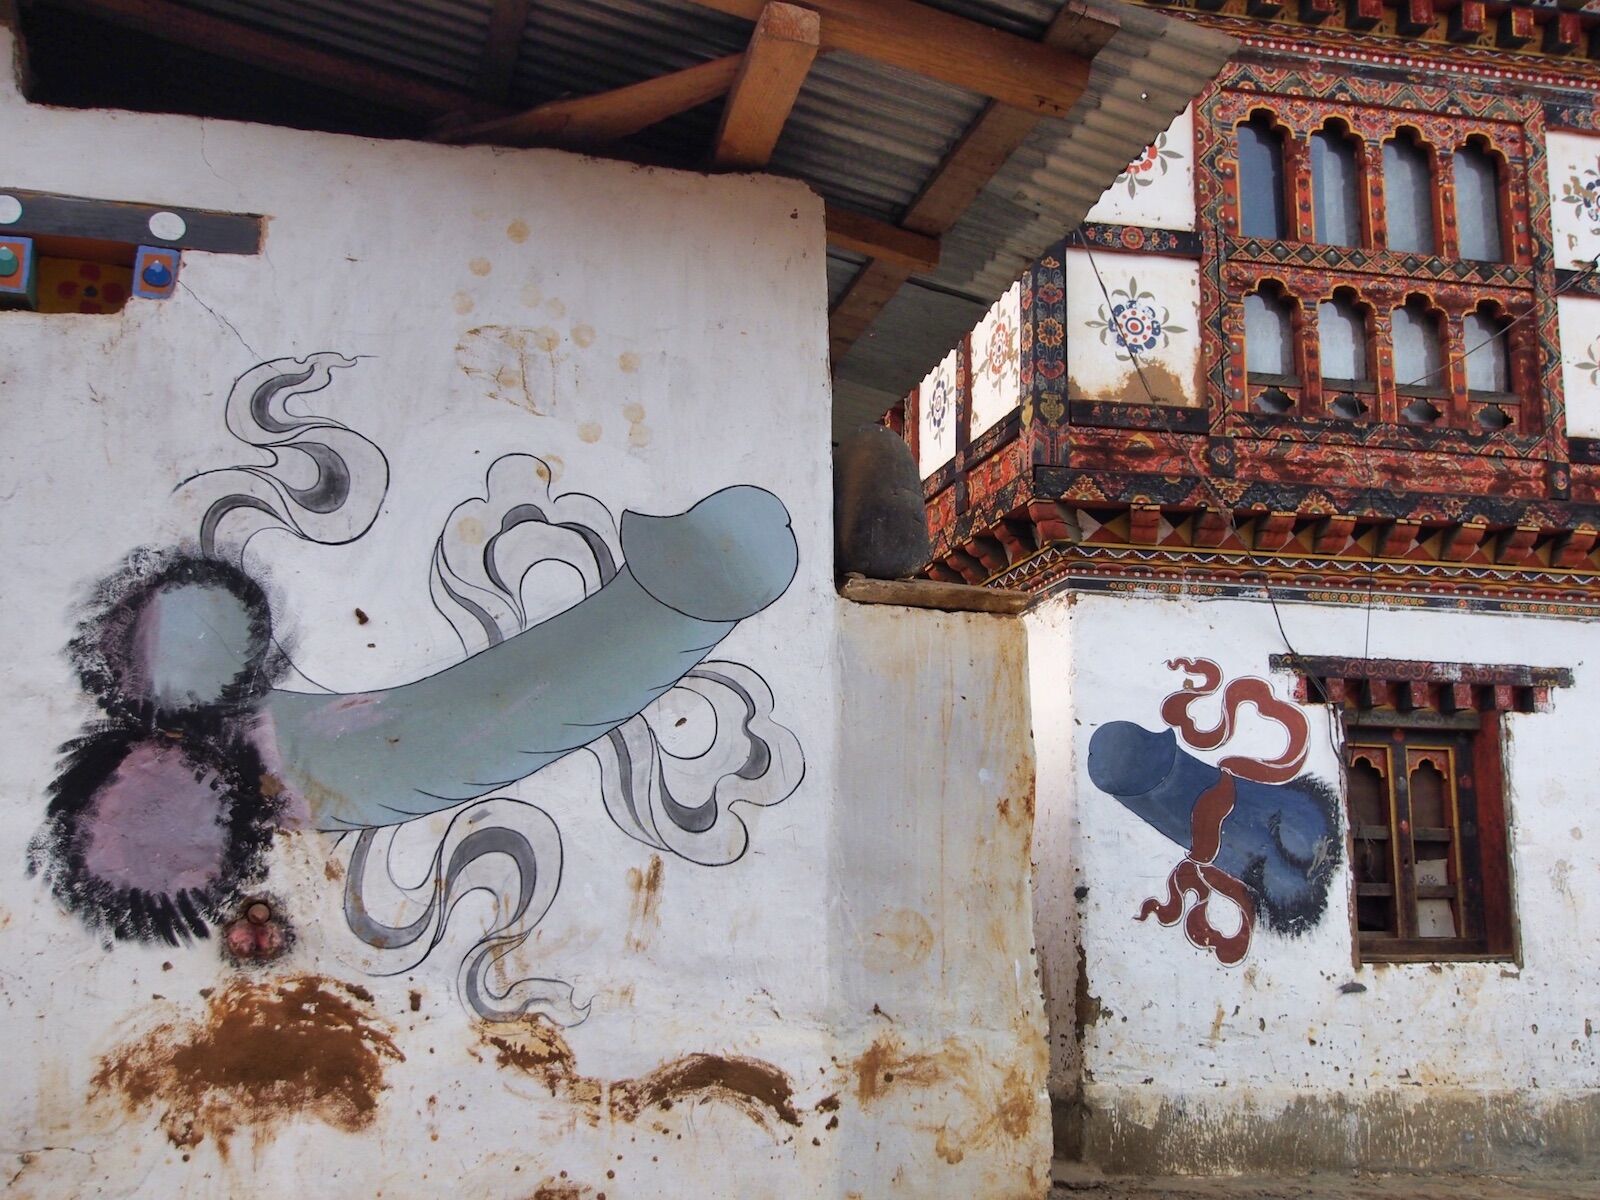 Two penises painted on the walls of houses in Bhutan. Both paintings are elaborate and colorful.